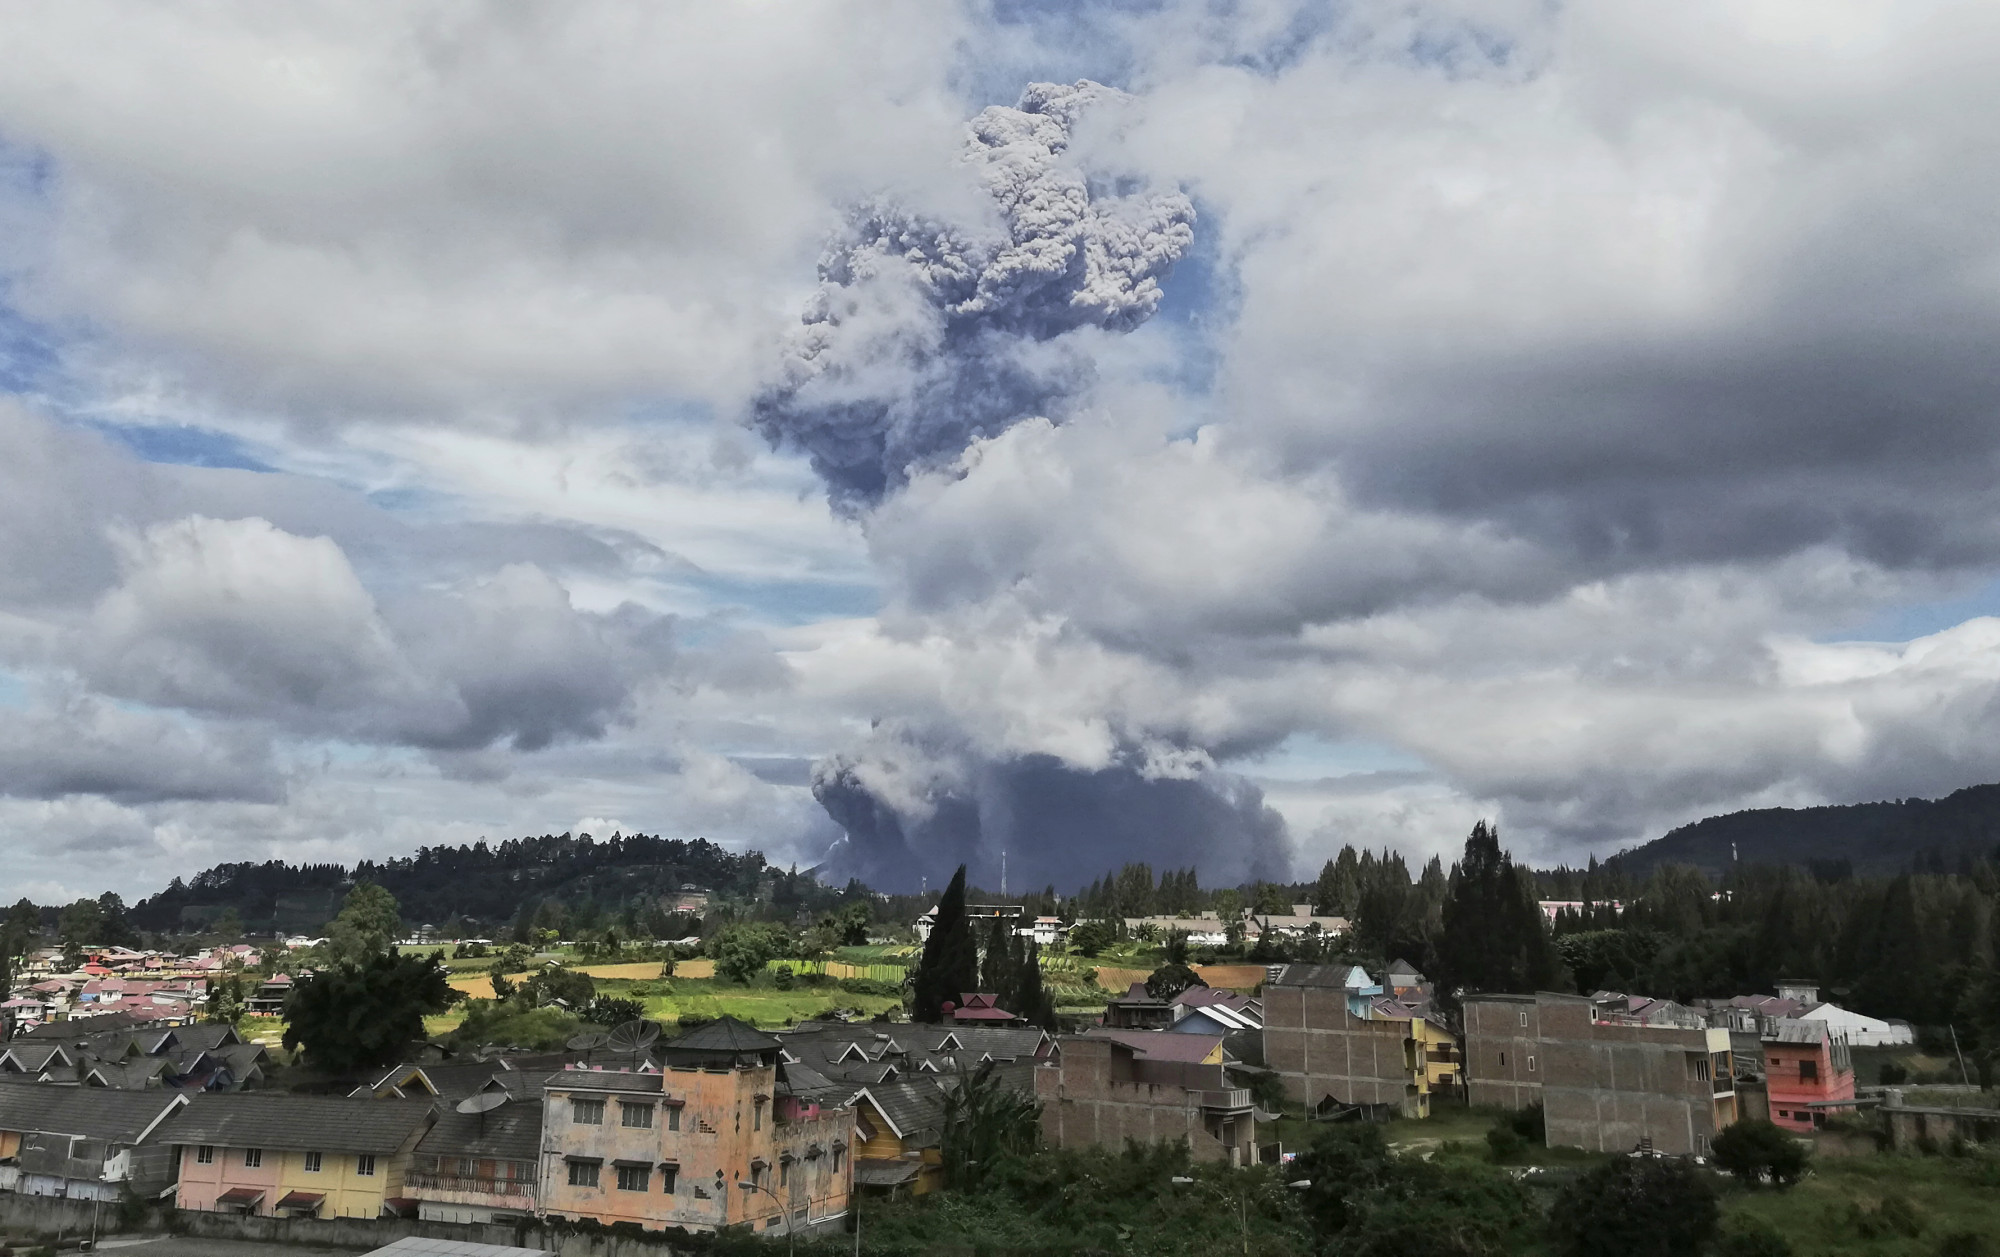 Indonesia’s Sinabung Volcano Ejects Towering Column of Ash